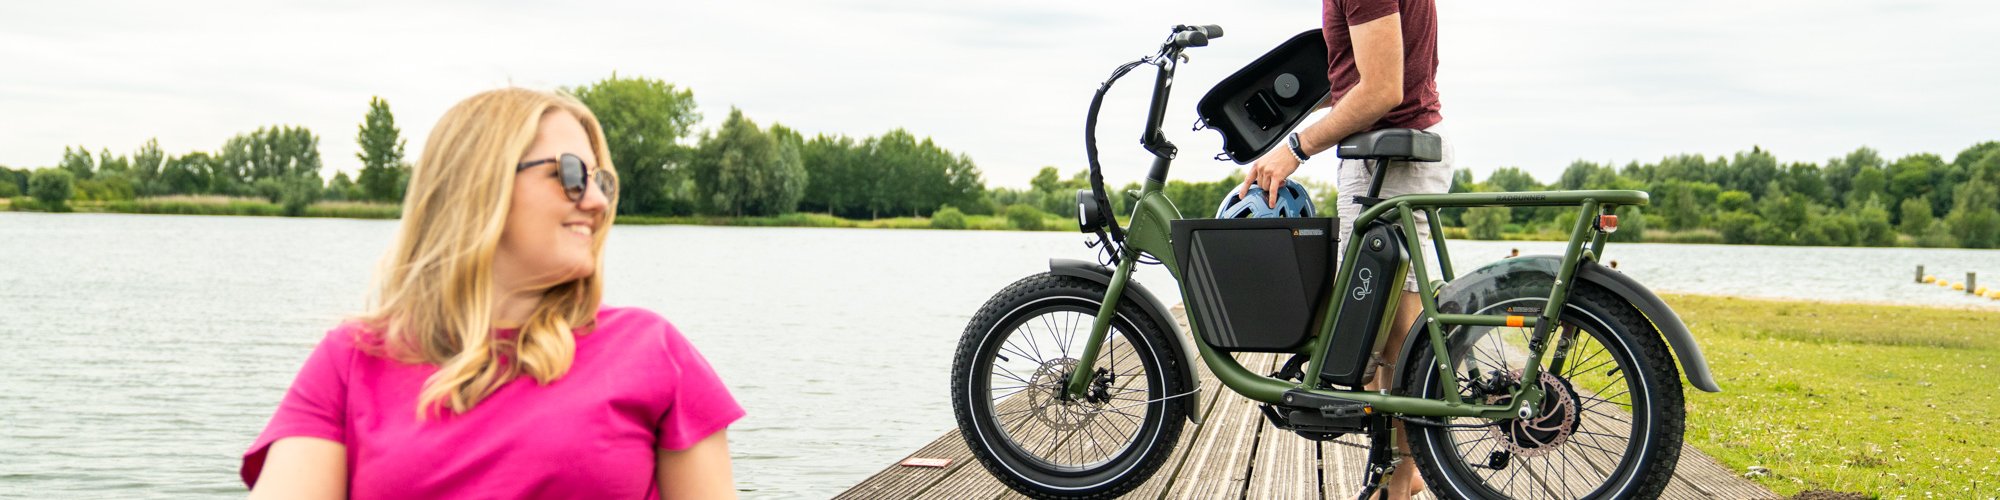 Electric Bike Accessories and Gear Rad Power Bikes Europe